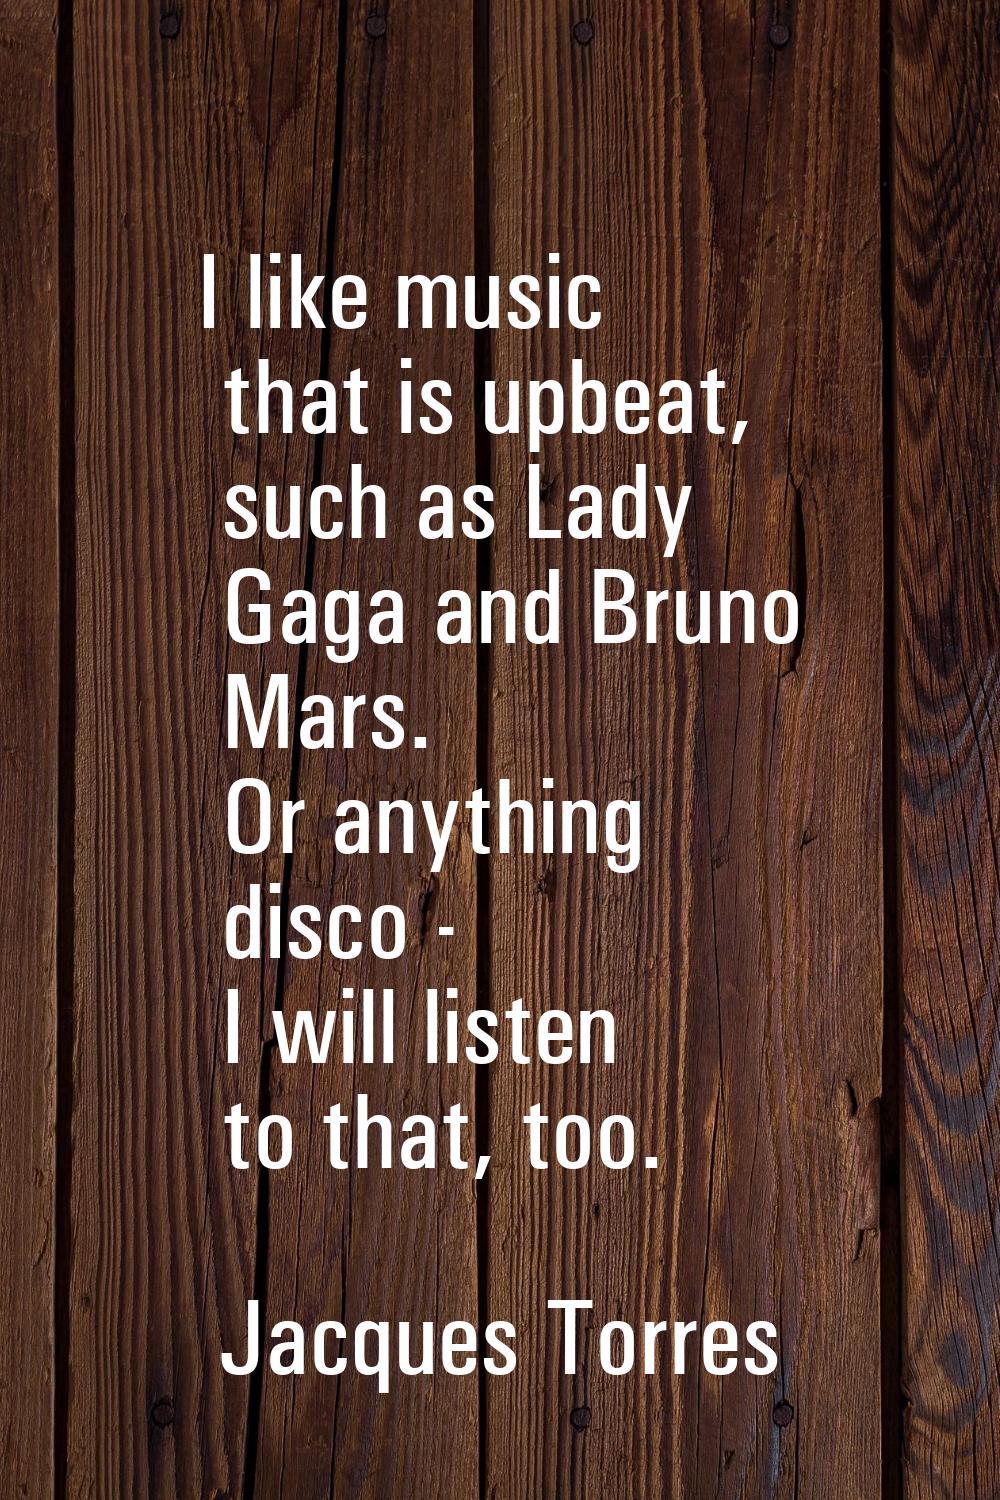 I like music that is upbeat, such as Lady Gaga and Bruno Mars. Or anything disco - I will listen to